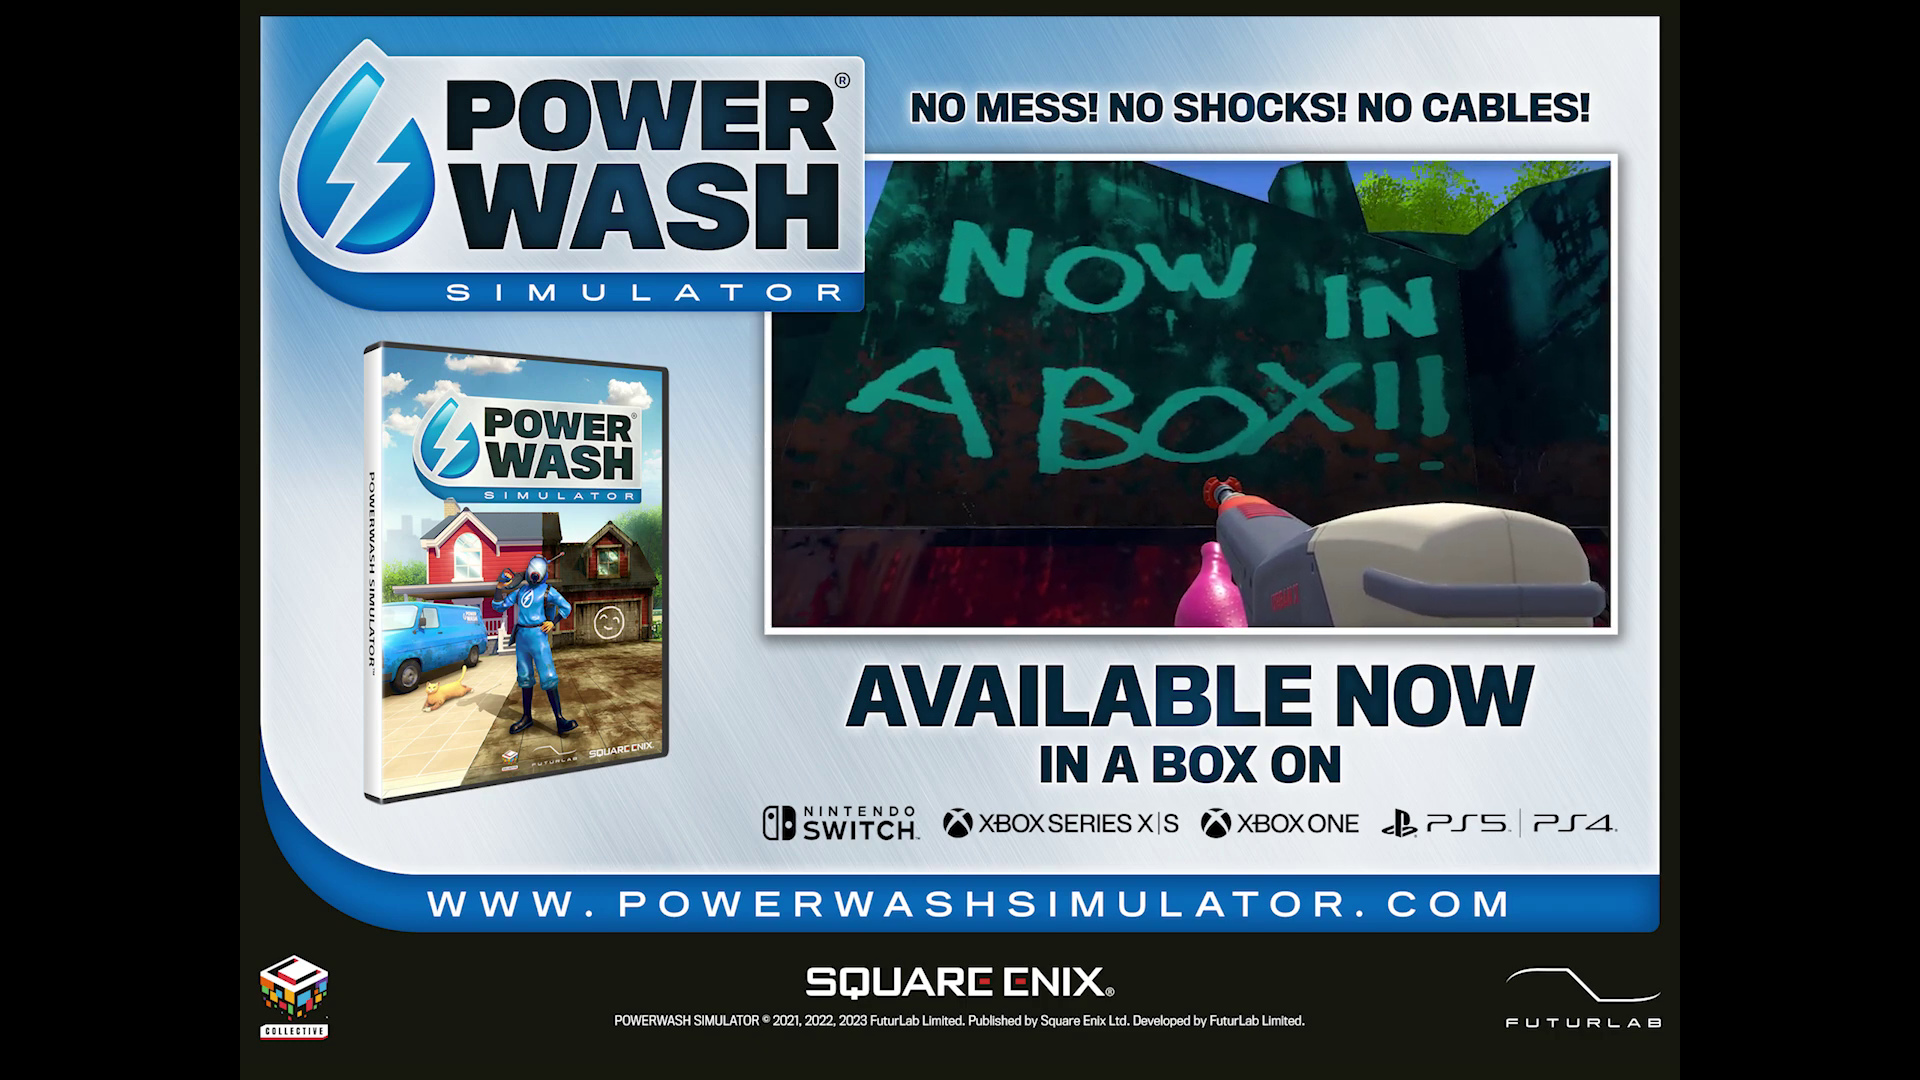 Free FINAL FANTASY themed DLC available in PowerWash Simulator!